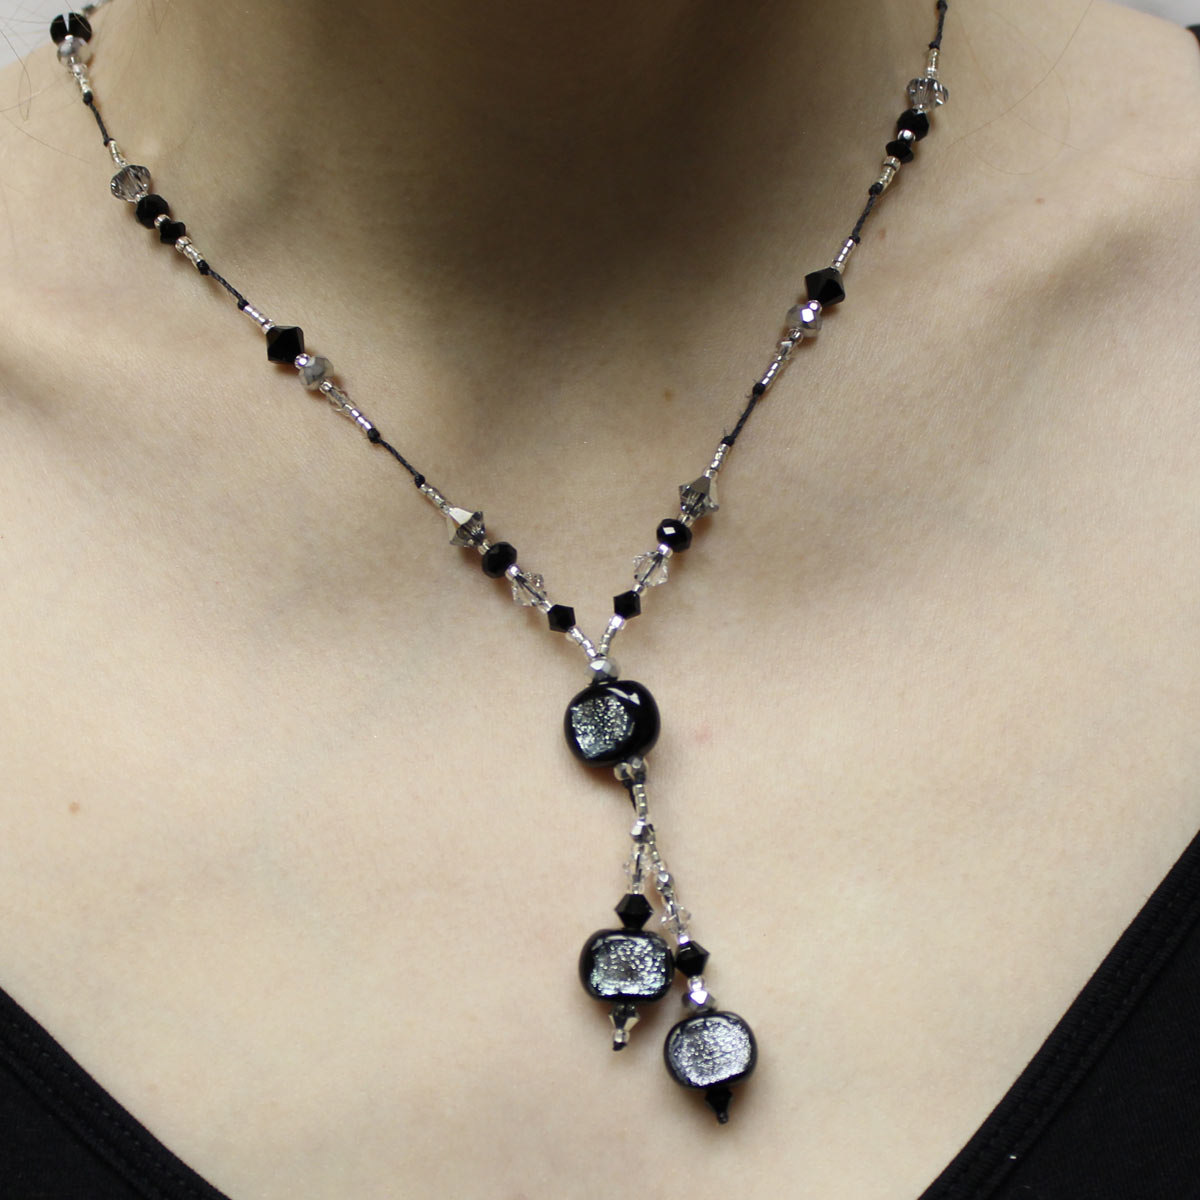 double drop necklace, lampwork beads, black crystals, clear crystals, silver accent necklace